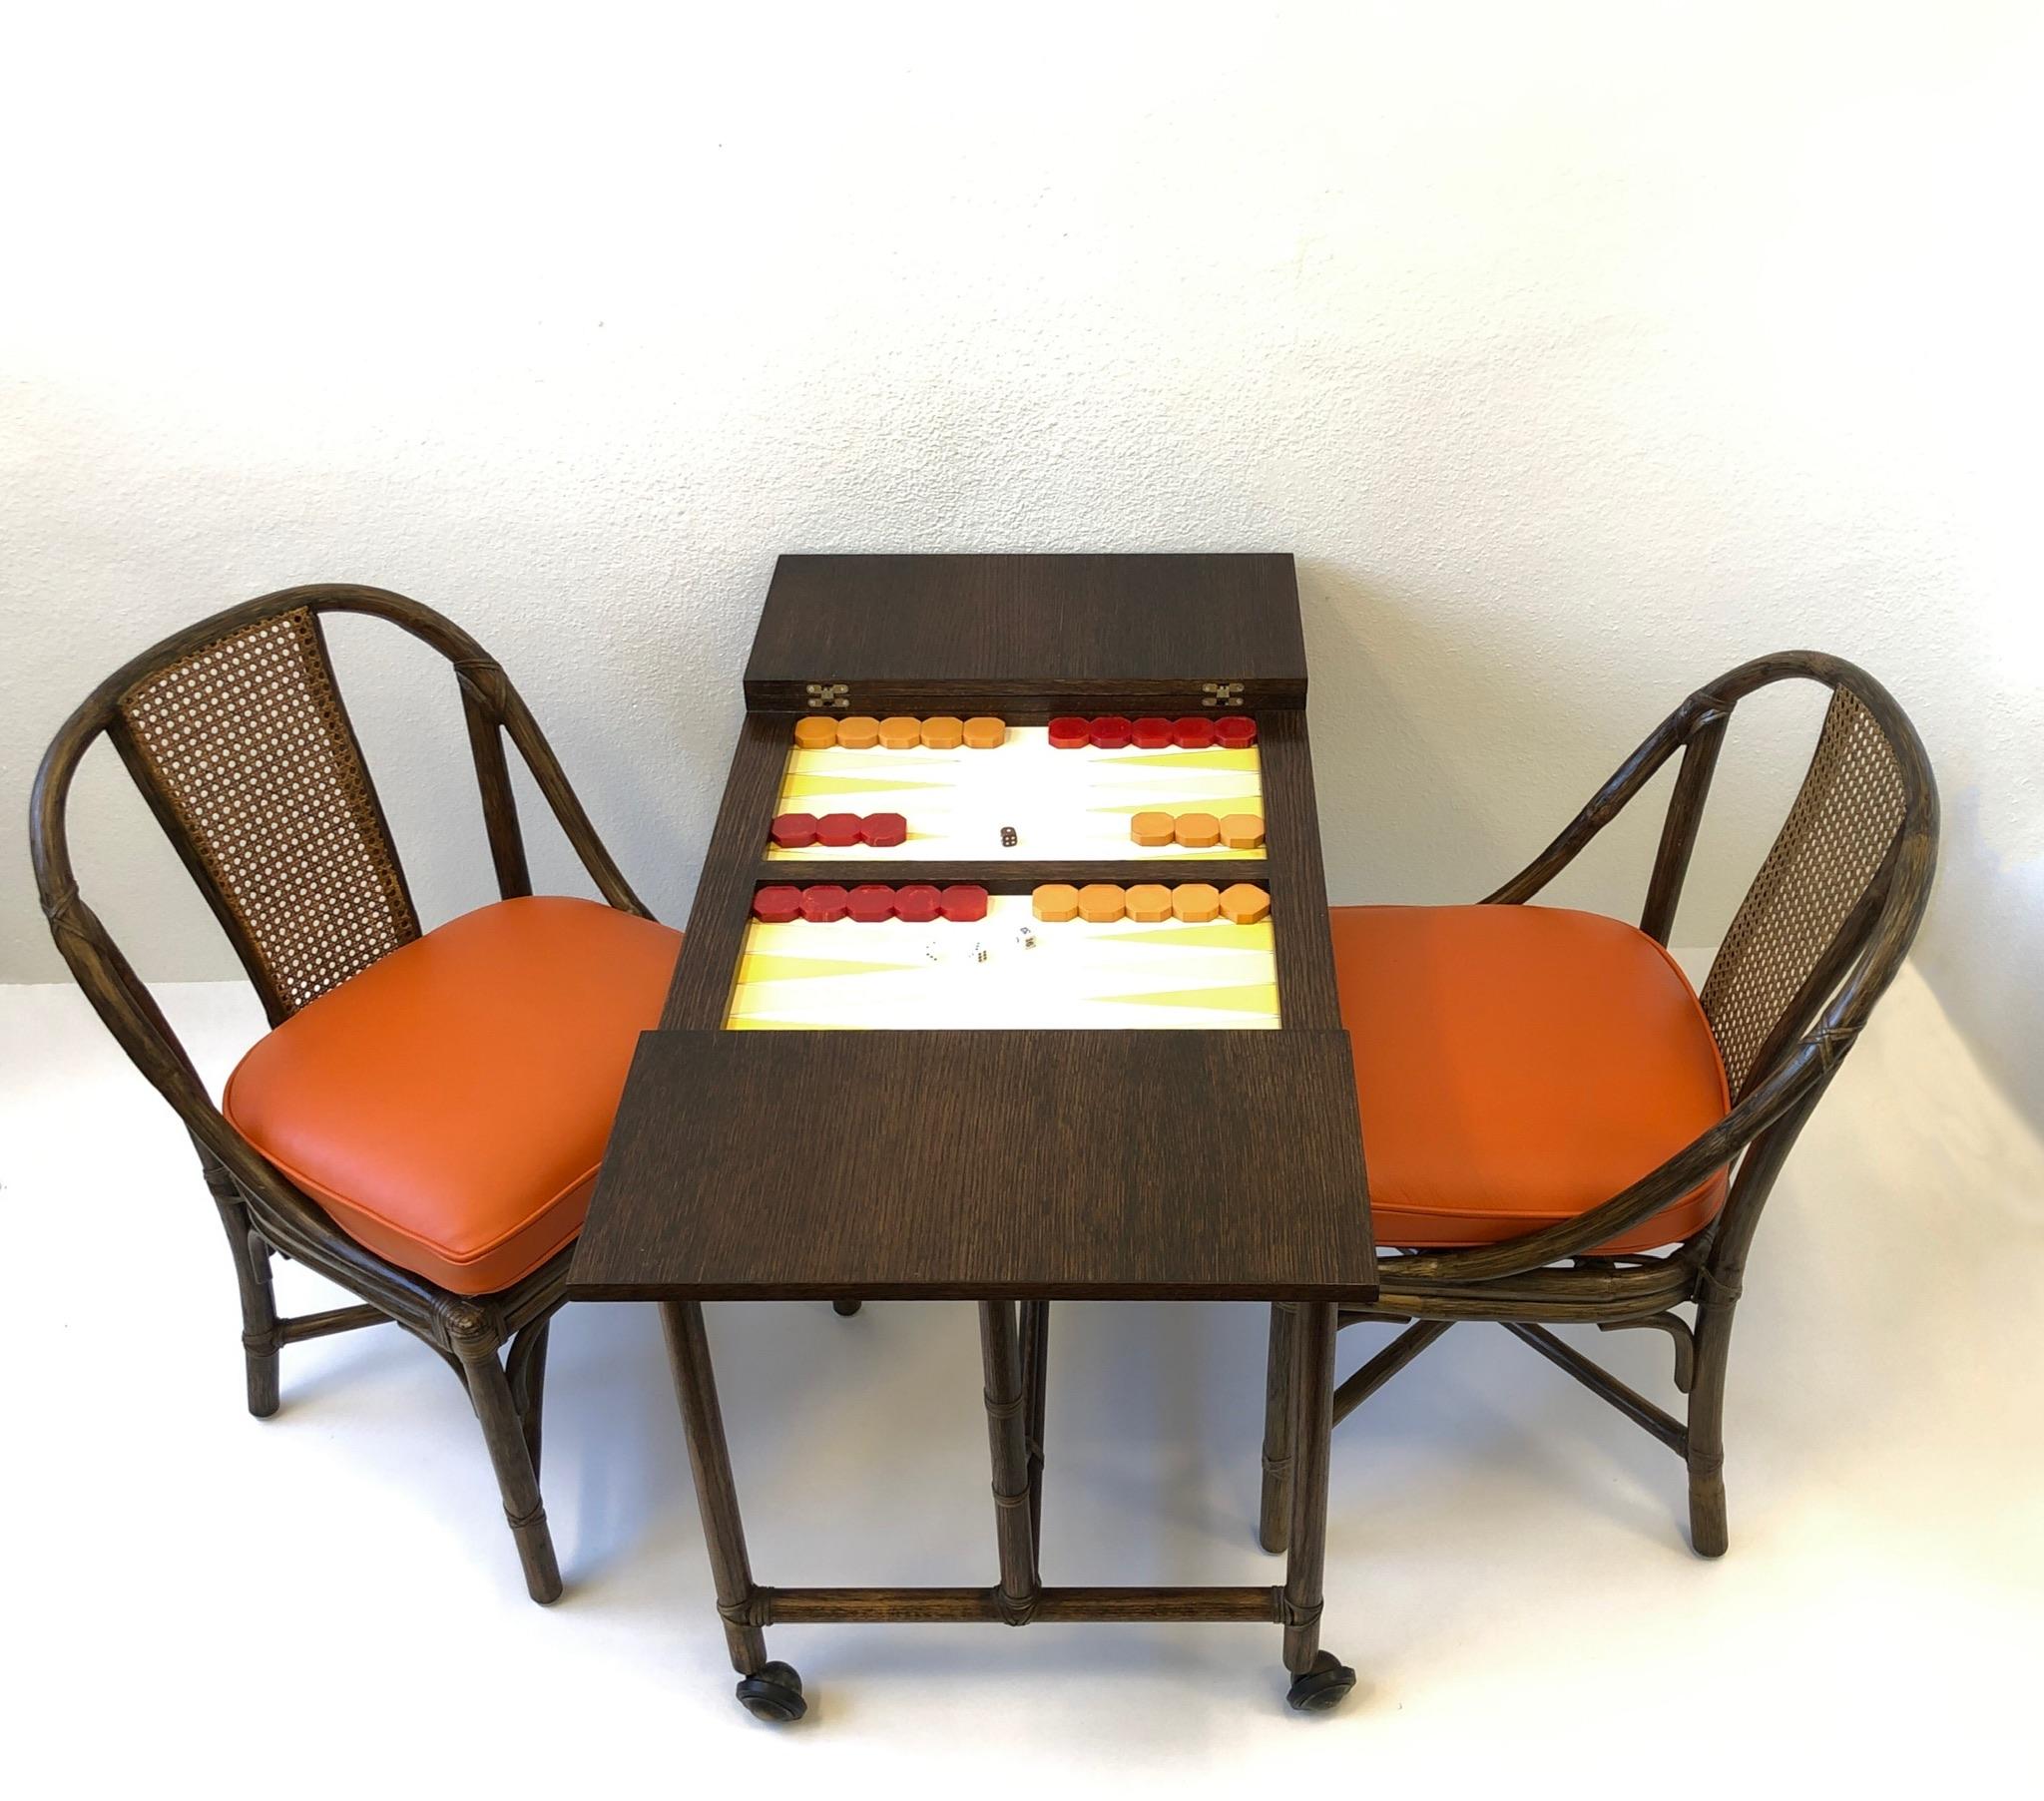 Rare backgammon game table and chairs designed by McGuire from the 1960s. Can be closed up to play cards or used as a console table. Table is constructed of dark oak and bamboo. Game board is leather and the playing pieces are bakelite.
New orange